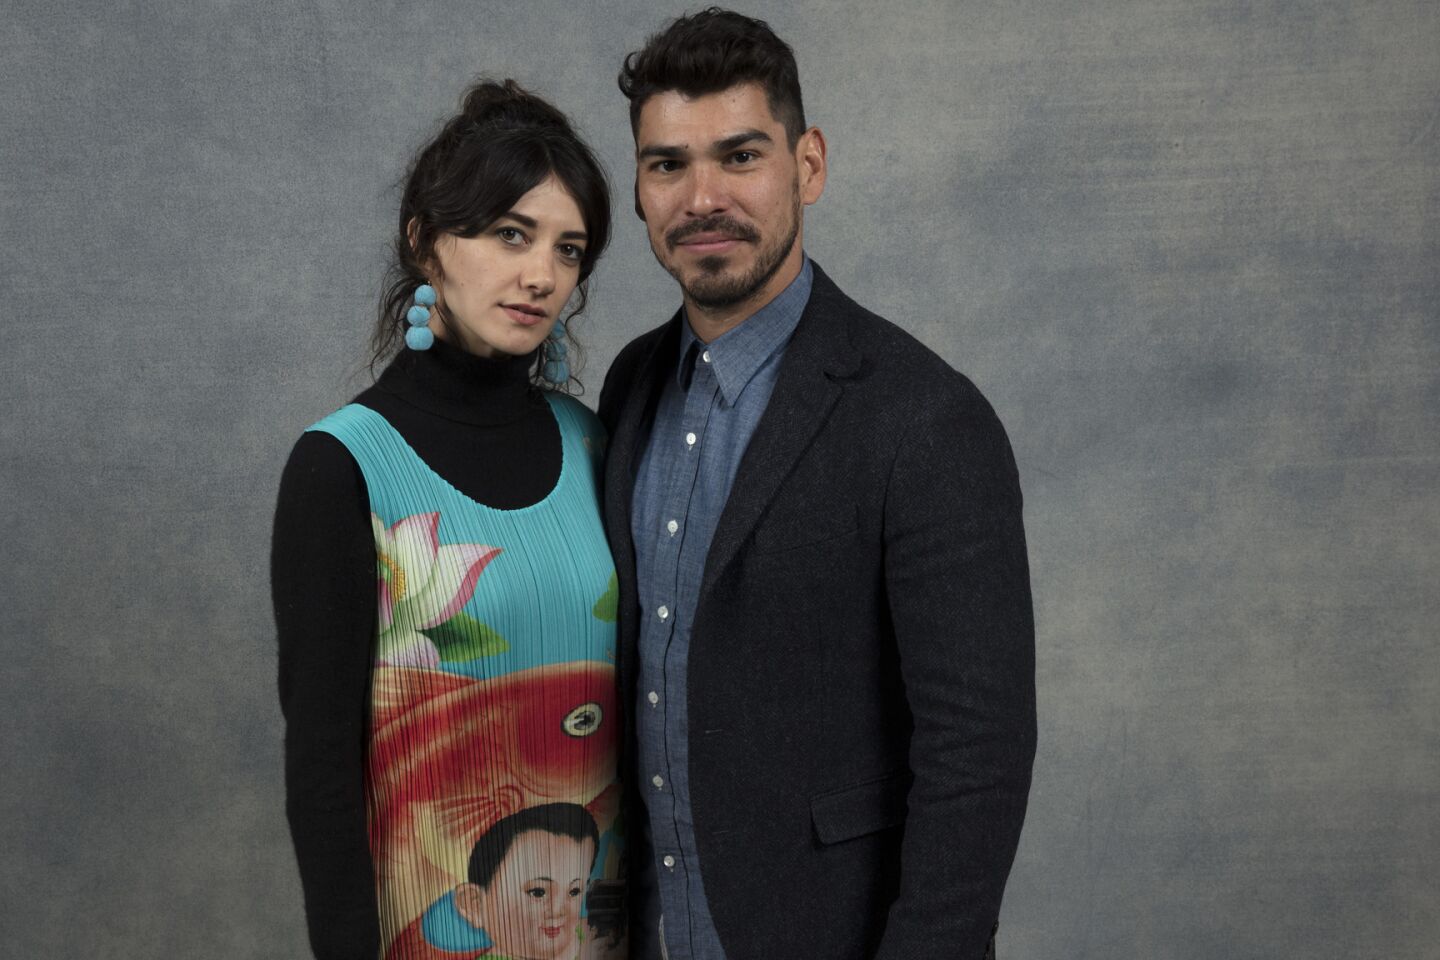 Actress Sheila Vand, and actor Raul Castillo, from the film, "We The Animals," photographed in the L.A. Times Studio at Chase Sapphire on Main, during the Sundance Film Festival in Park City, Utah, Jan. 20, 2018.